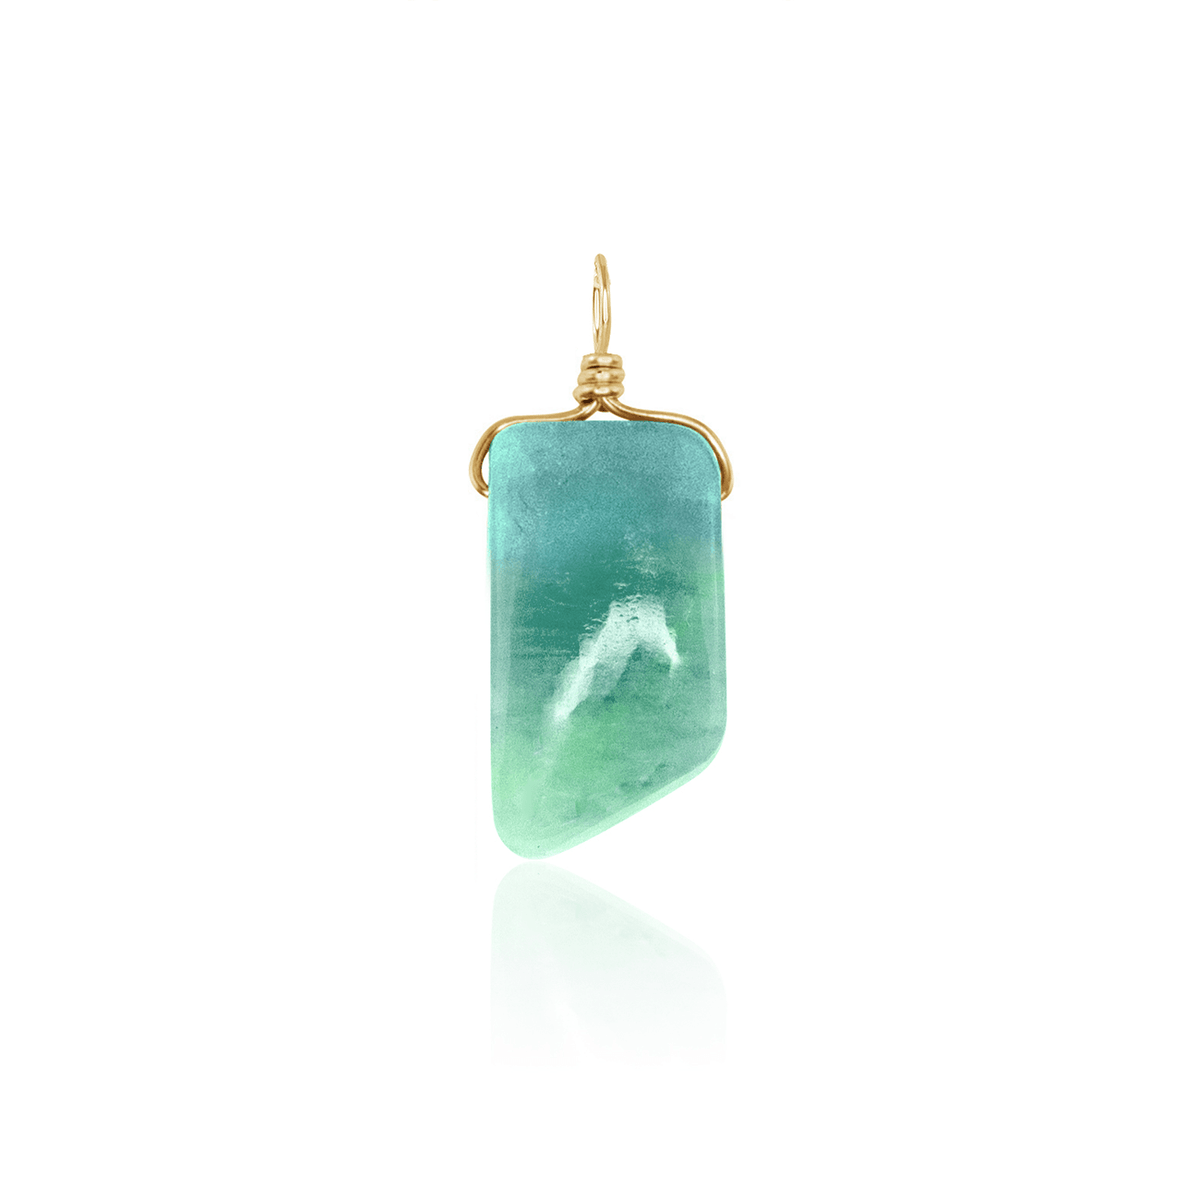 Small Smooth Amazonite Crystal Pendant with Gentle Point - Small Smooth Amazonite Crystal Pendant with Gentle Point - 14k Gold Fill - Luna Tide Handmade Crystal Jewellery